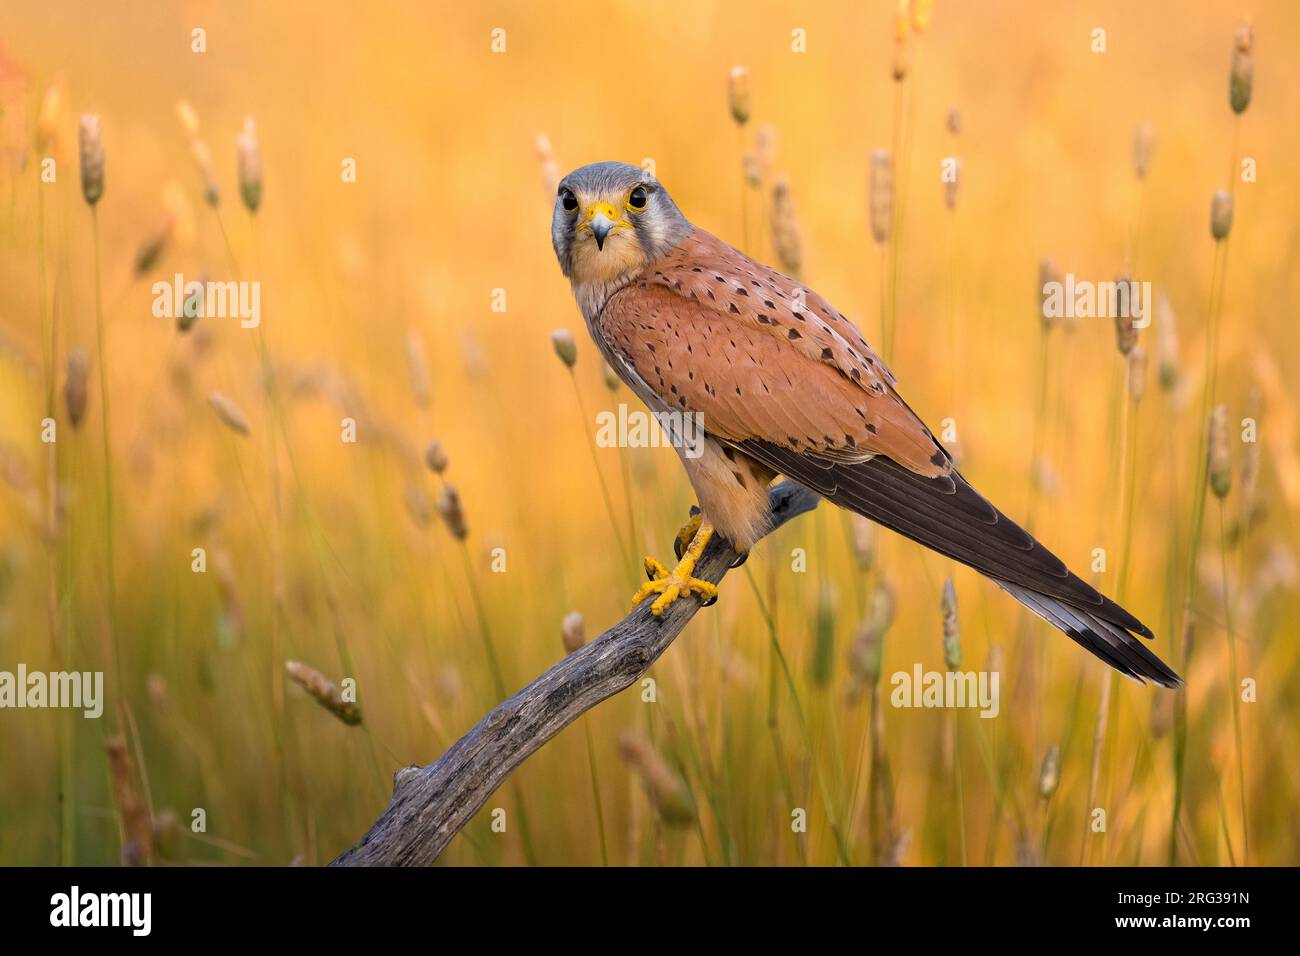 Male Common Kestrel (Falco tinnunculus) in Italy. Perched on a wooden pole in an agricultural field. Stock Photo